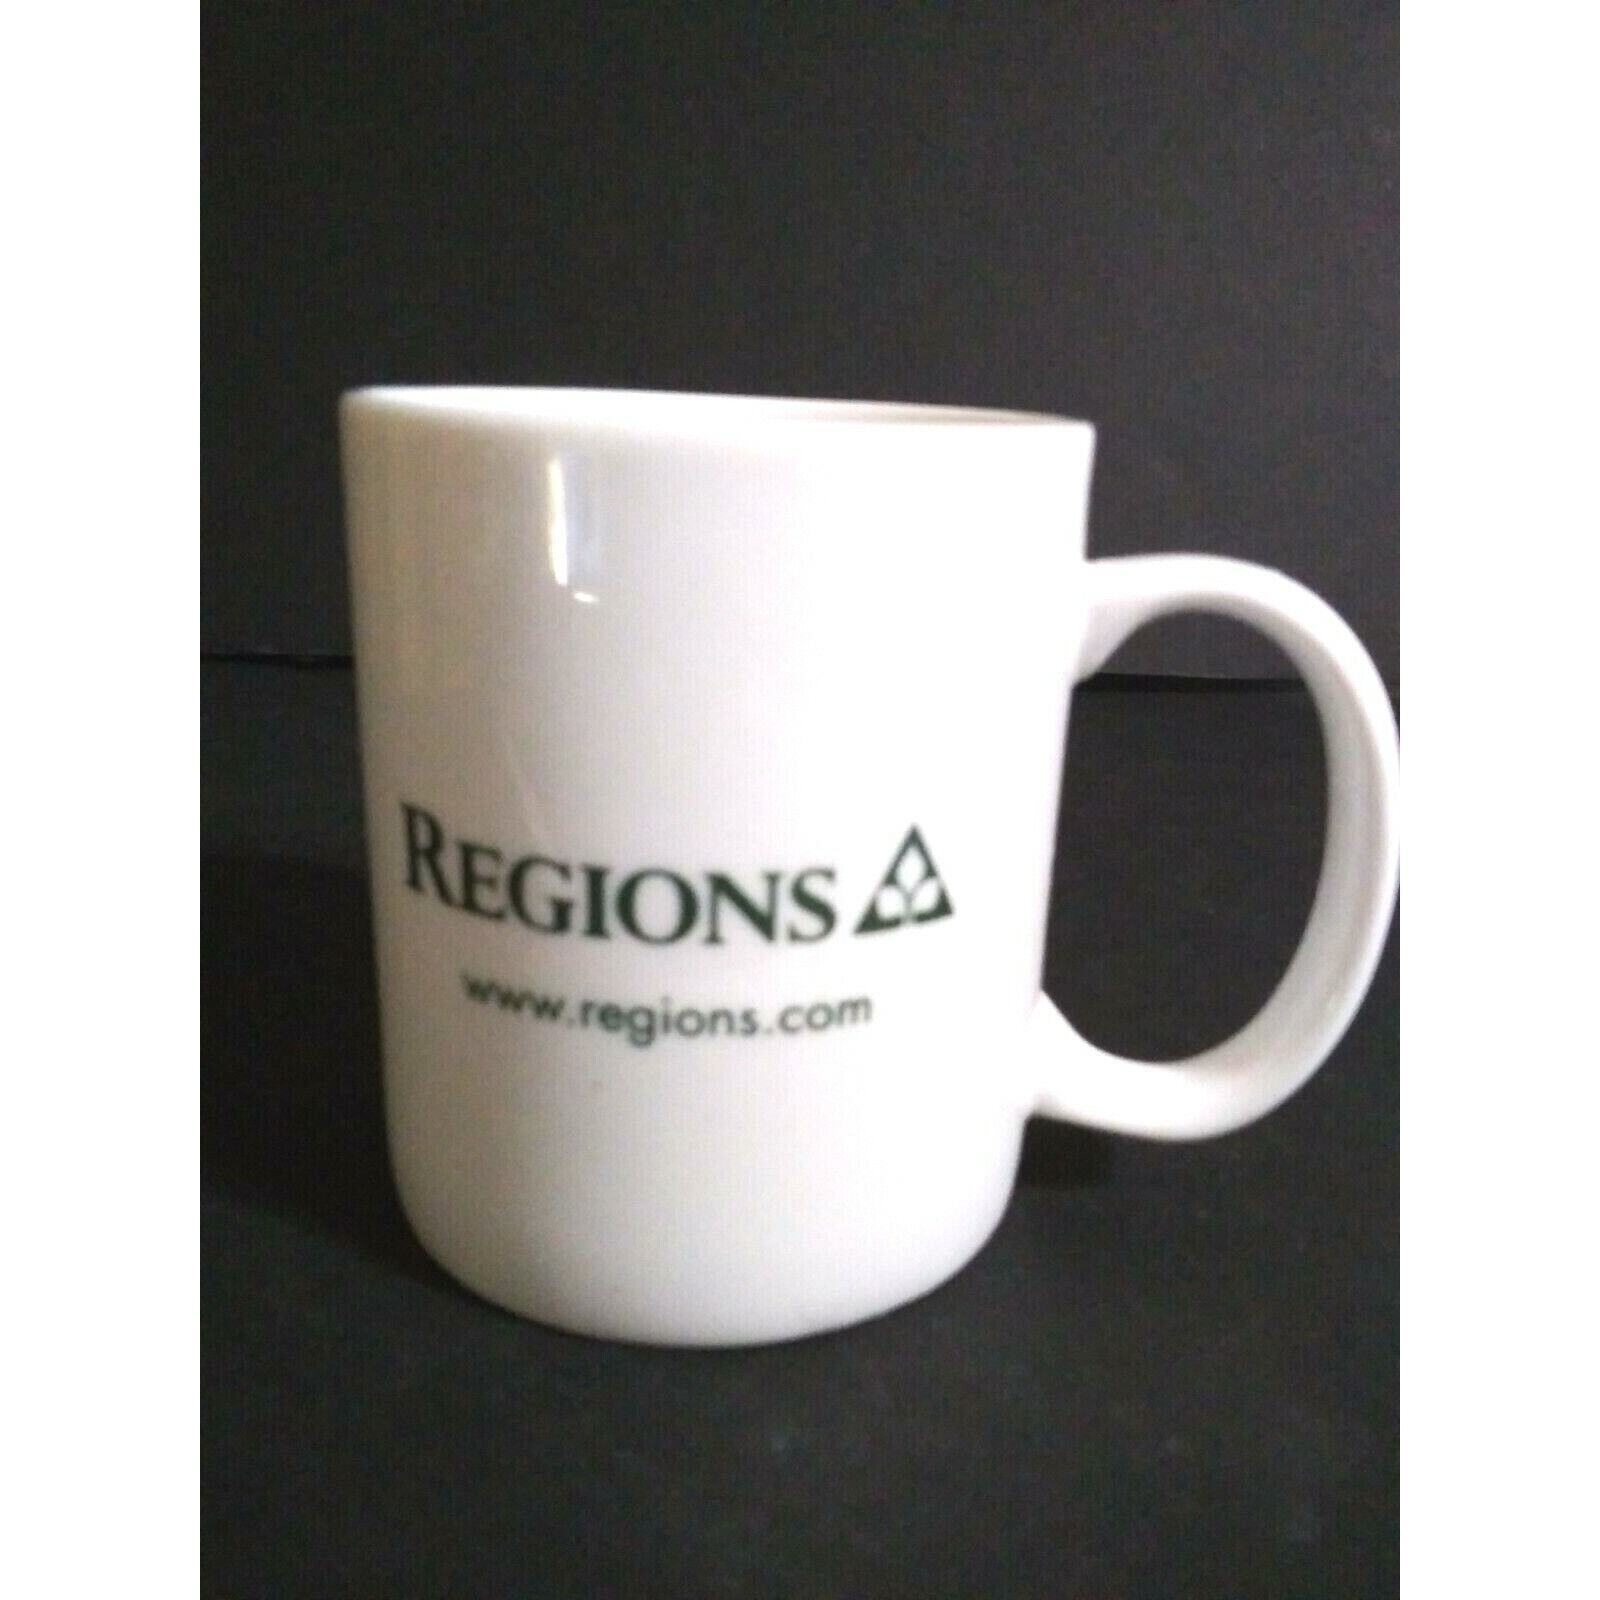 Regions Bank Coffee Cup Mug White Green Lettering Advertising